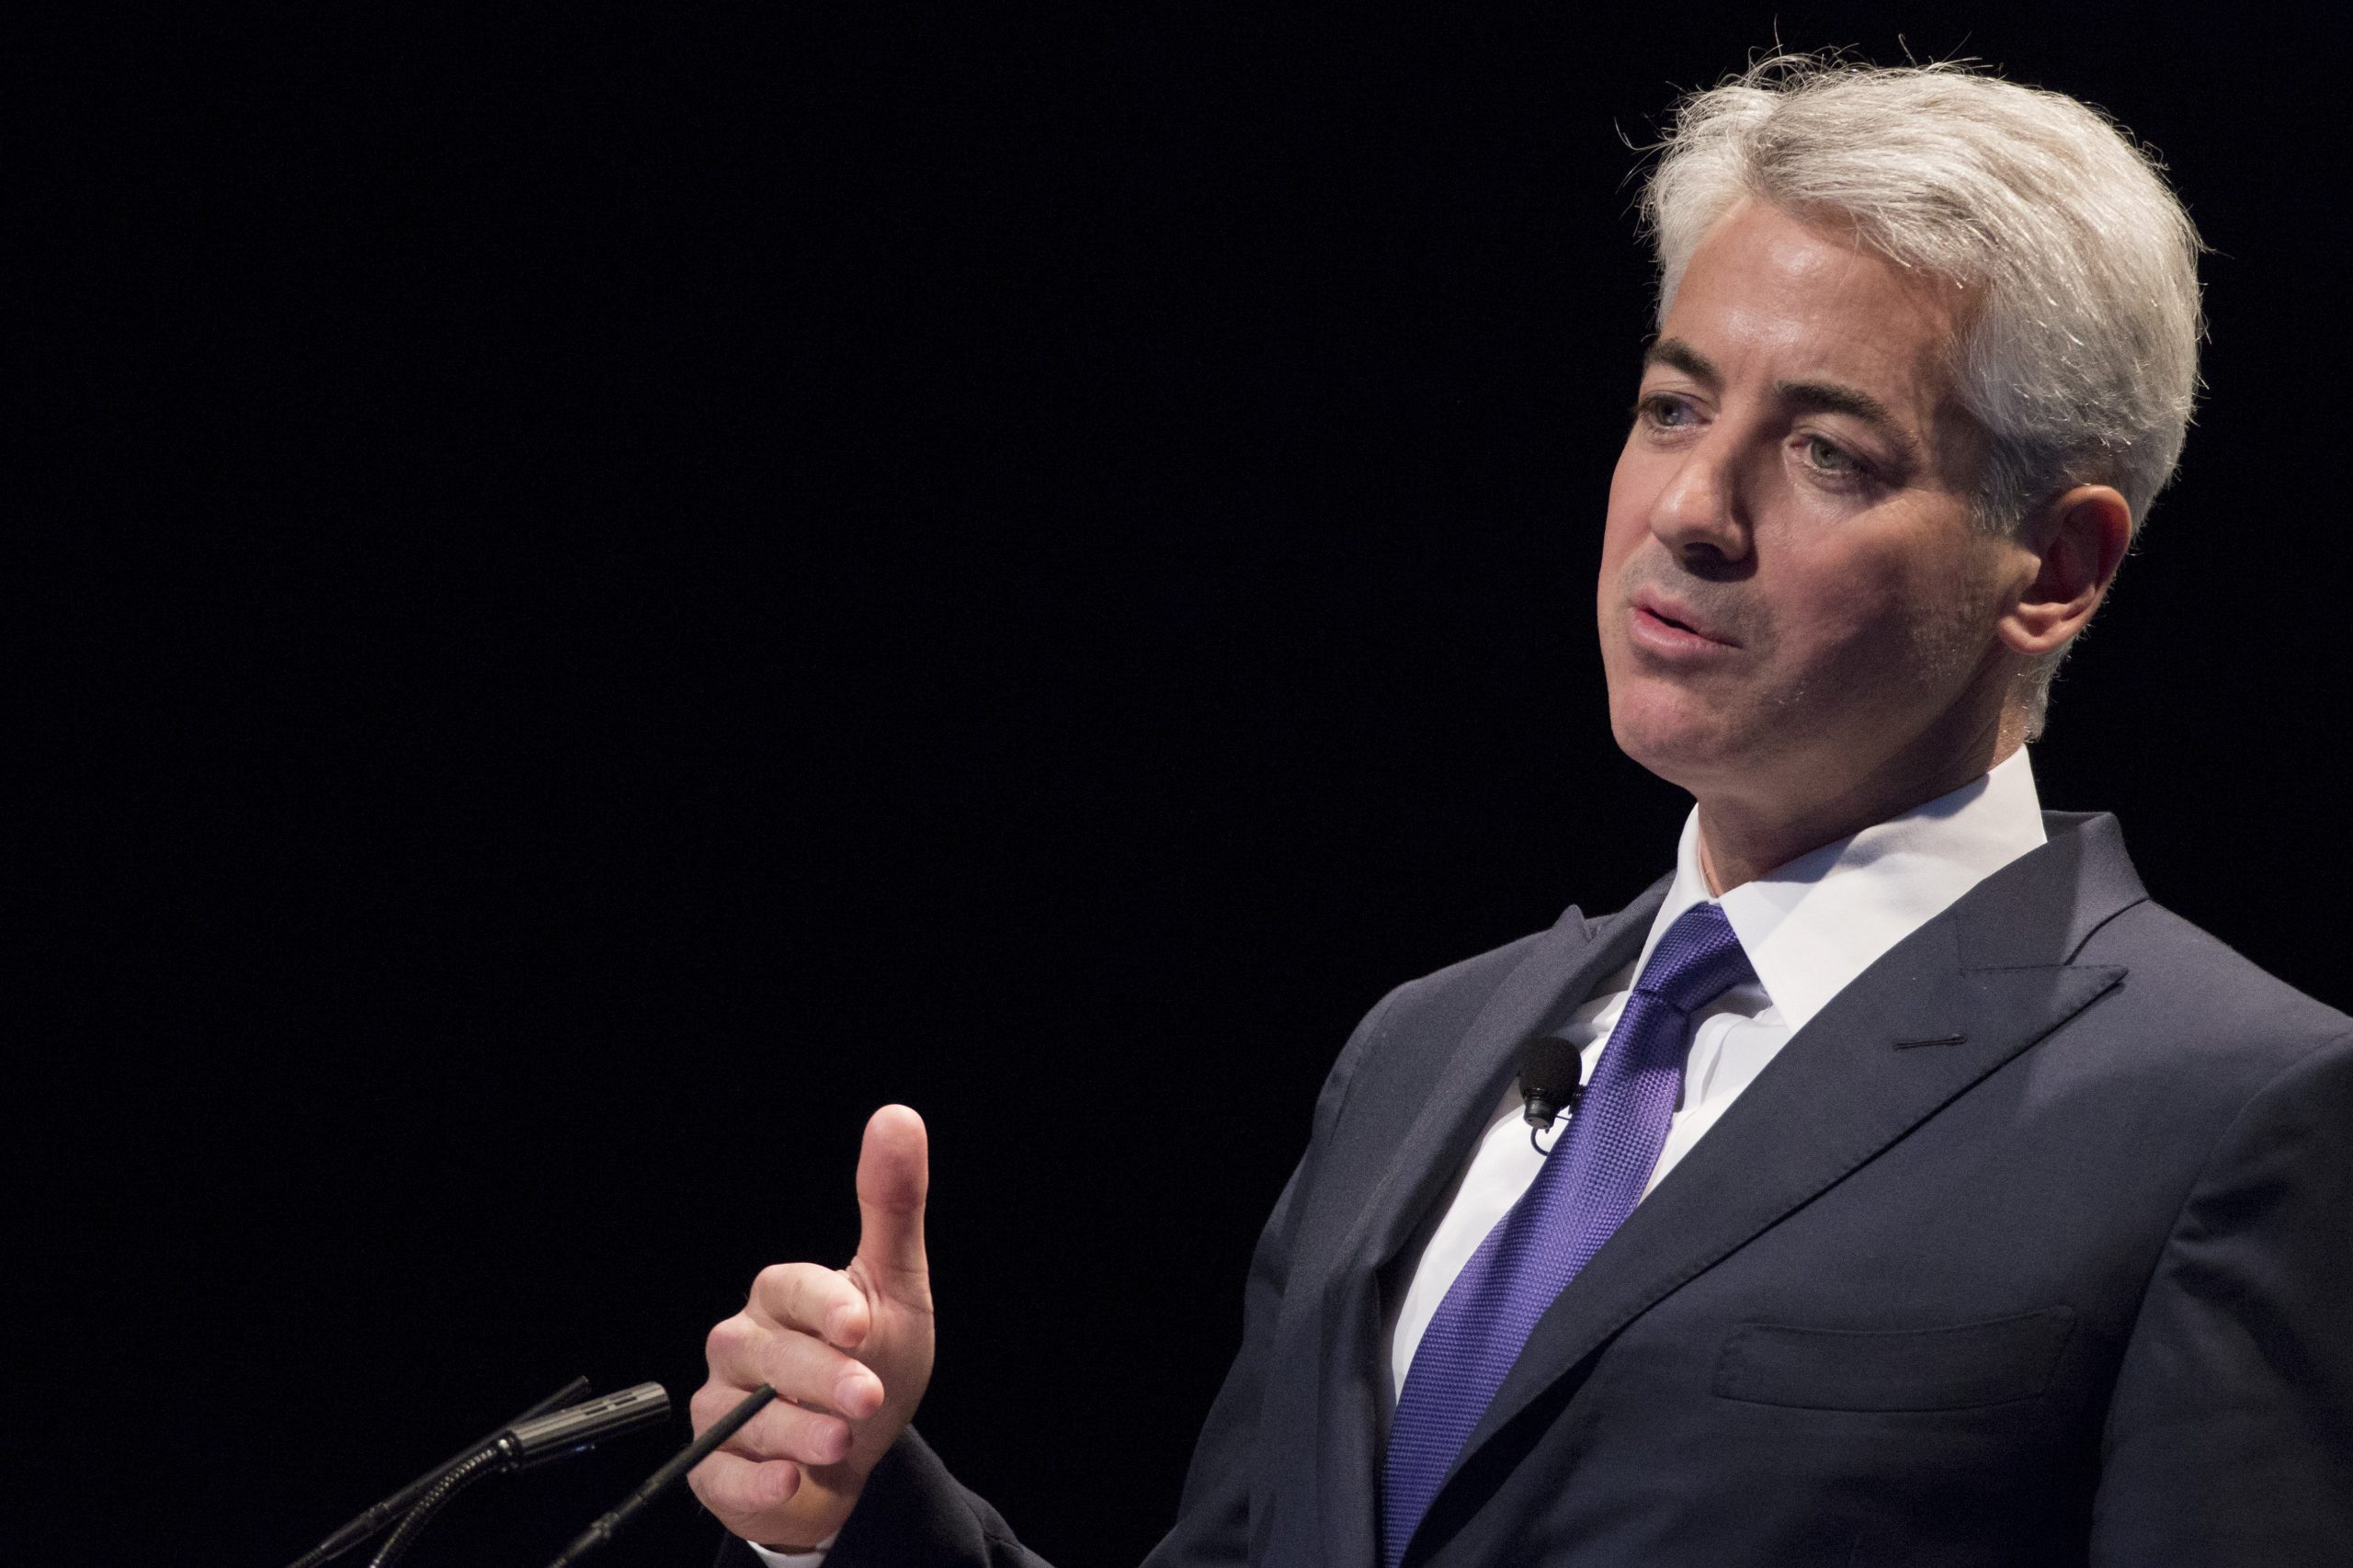 Ackman's Ascendancy: A Wealth Surge and Resounding Influence